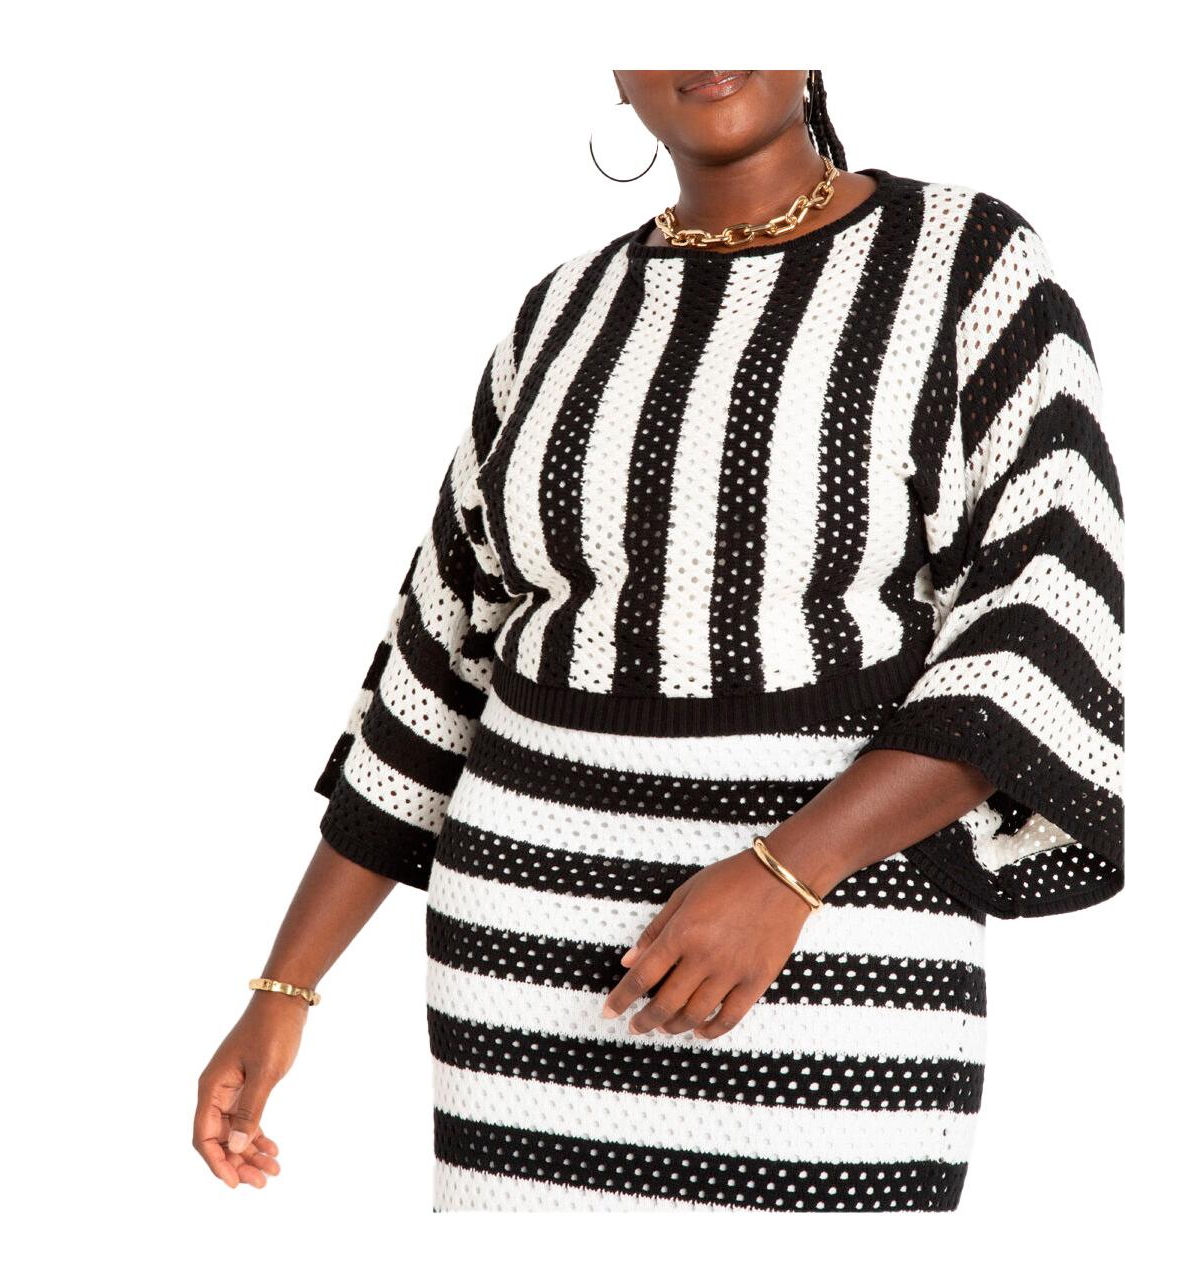 Plus Size Crochet Wide Sleeve Striped Sweater - Black and white black and white